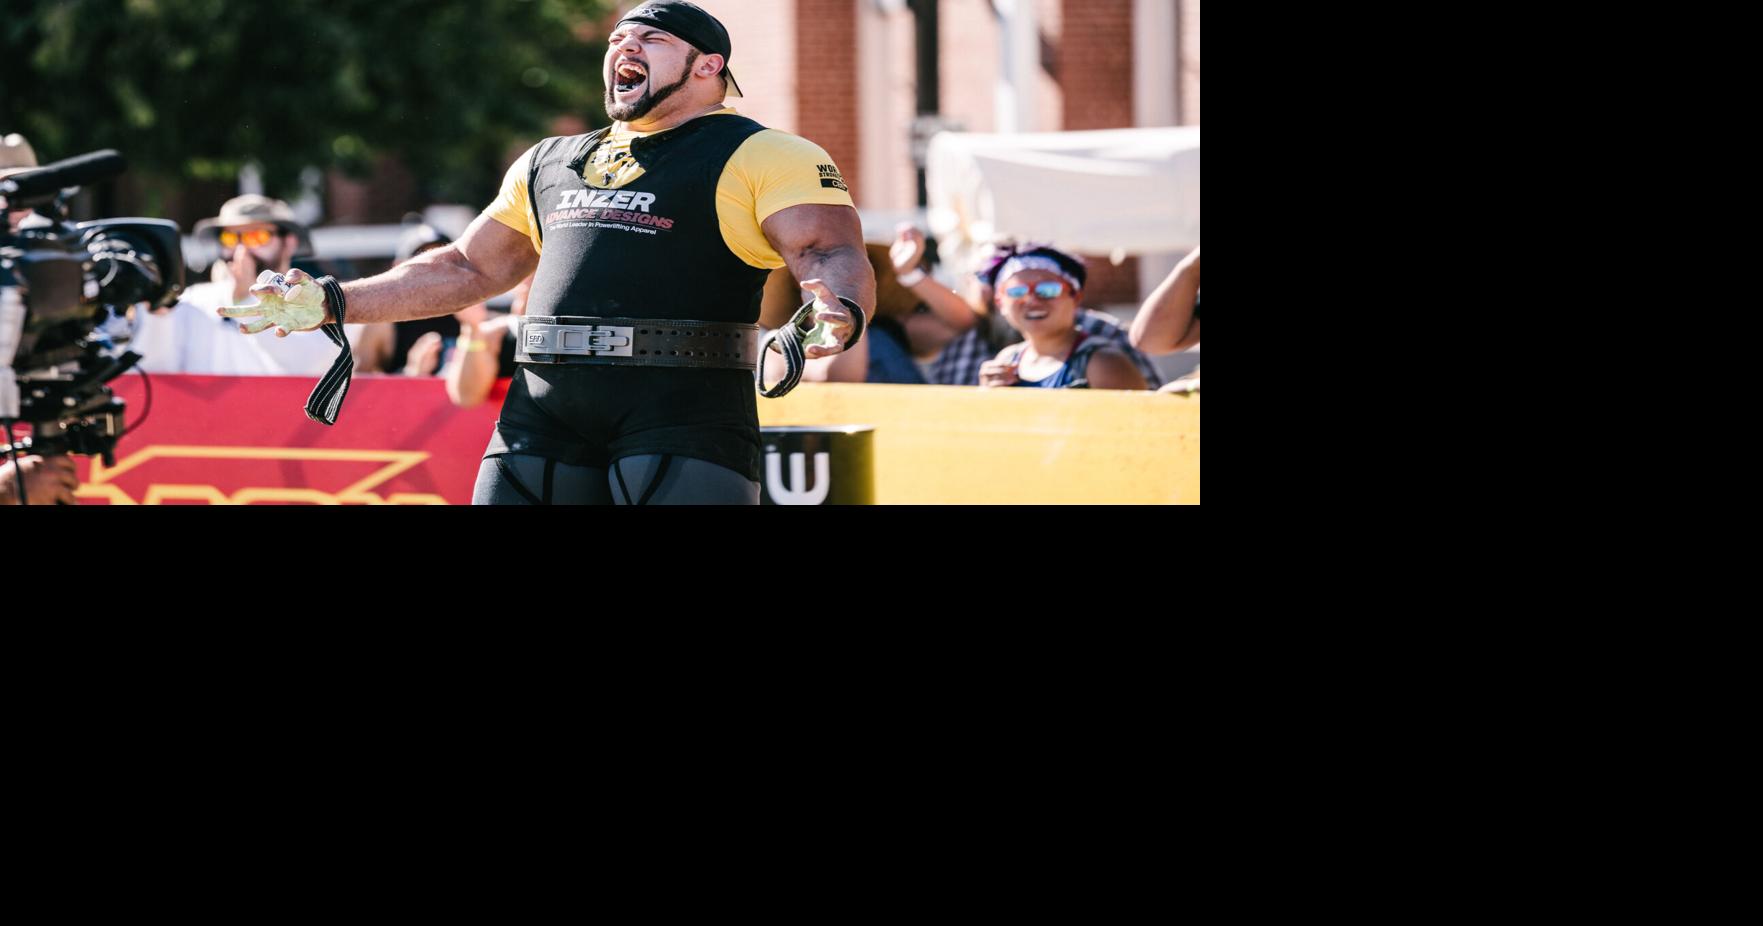 Delaware's Strongest Man winners crowned at Baywood Greens